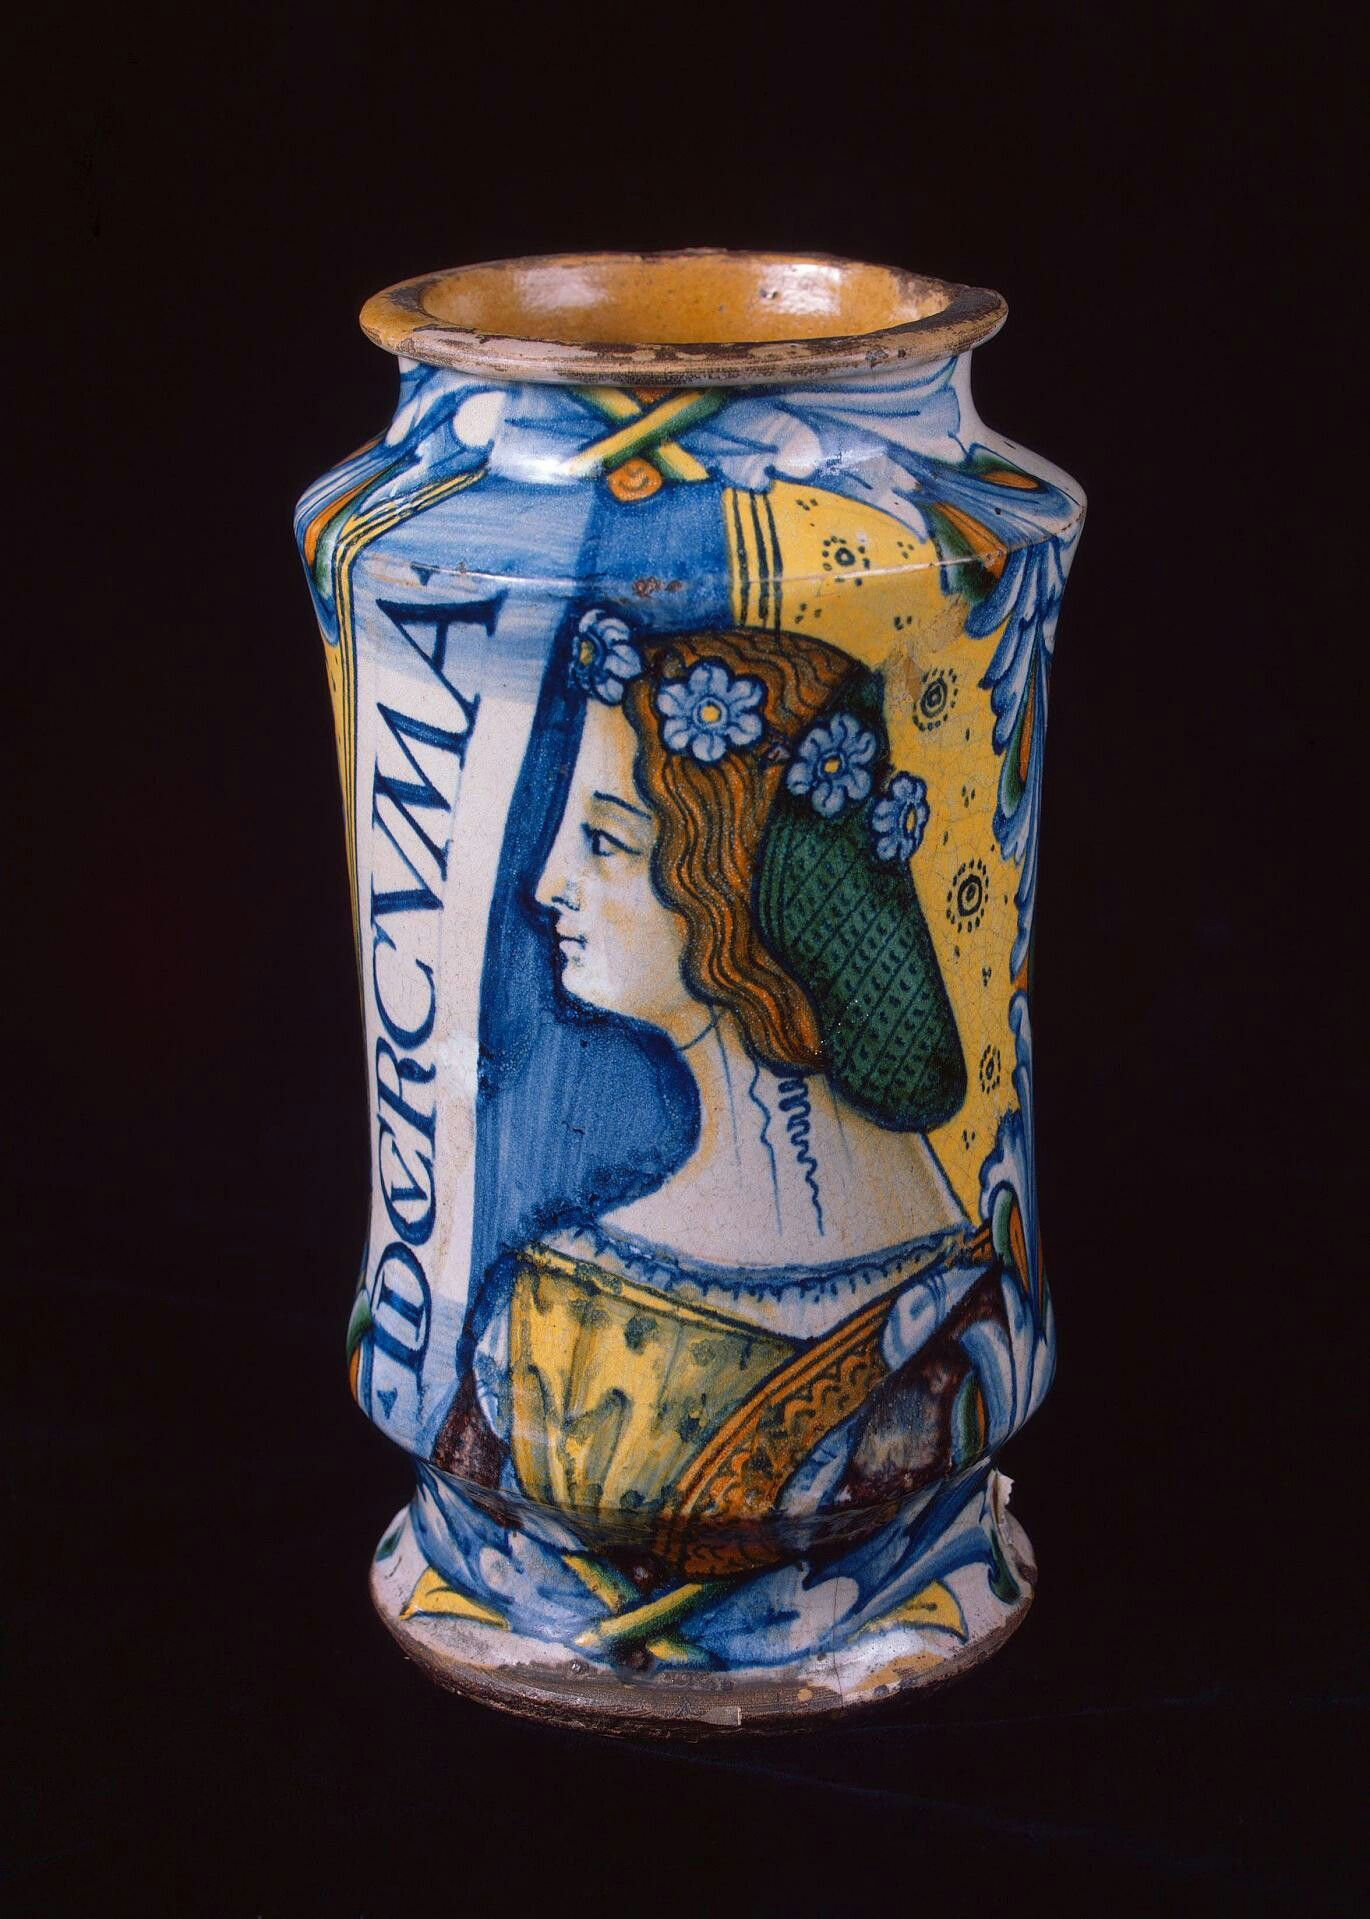 26 Spectacular Italian Pottery Vase 2024 free download italian pottery vase of albarello pharmacy jug with the depiction of a woman italy deruta with regard to albarello pharmacy jug with the depiction of a woman italy deruta circa